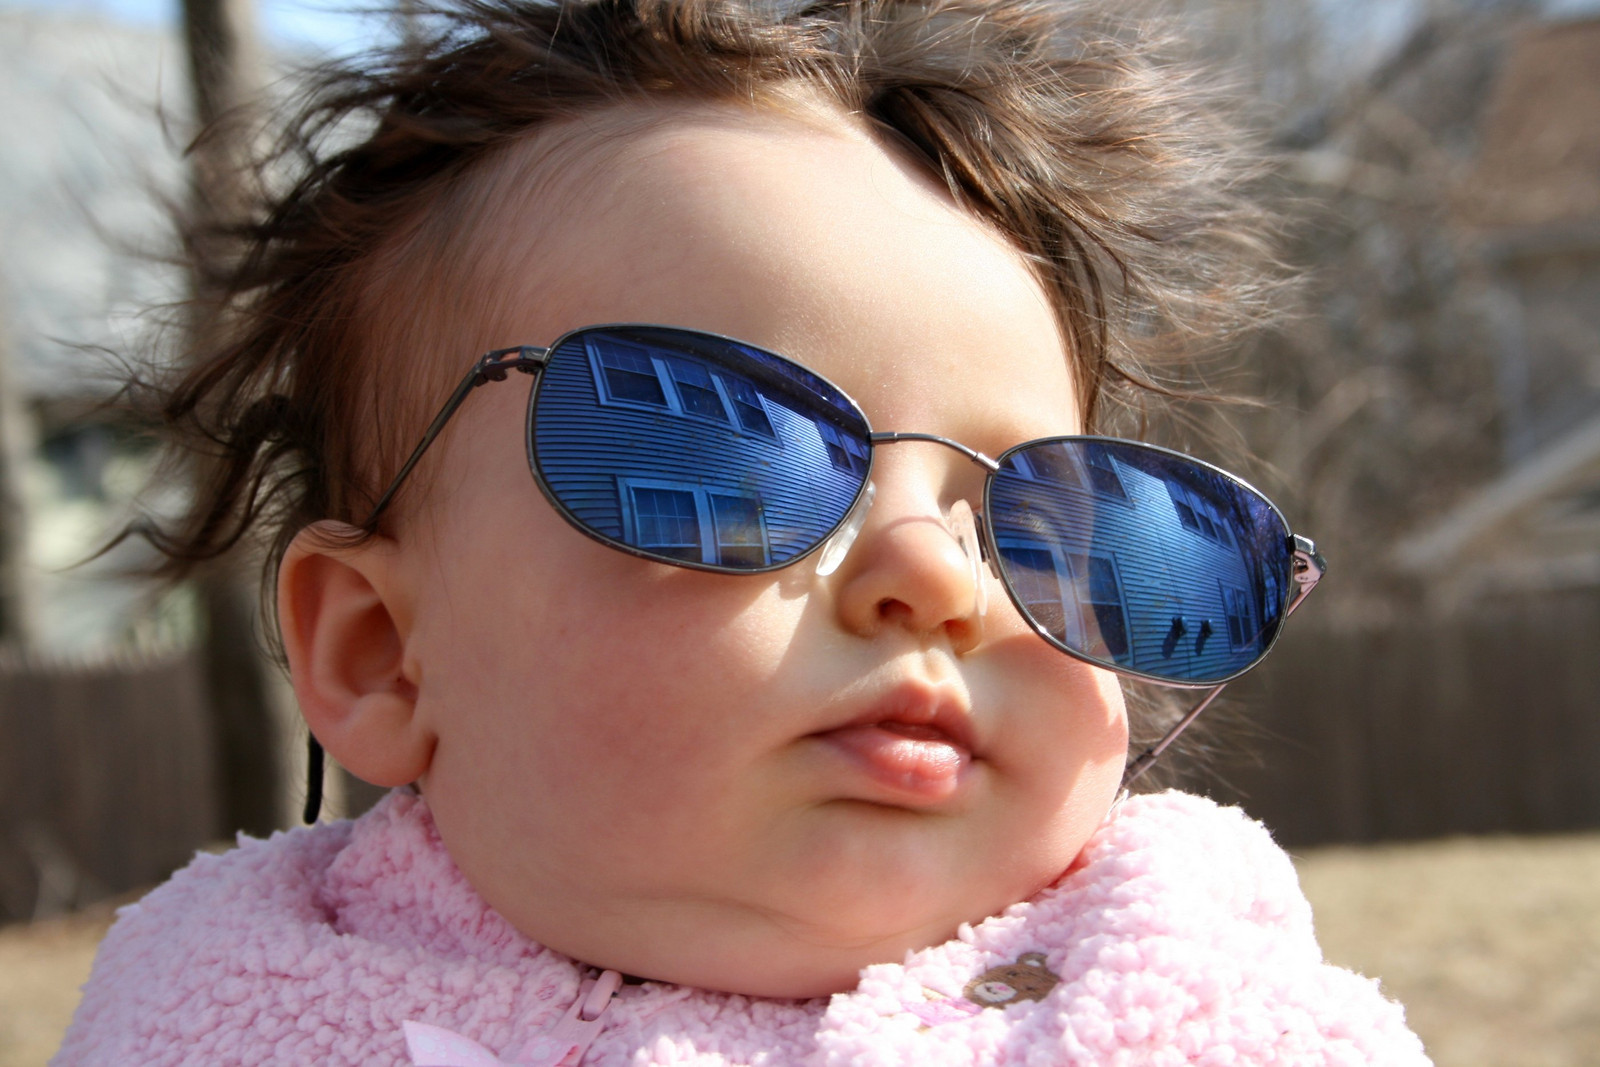 Creative Baby Photography: Sunglasses and Crazy Hair